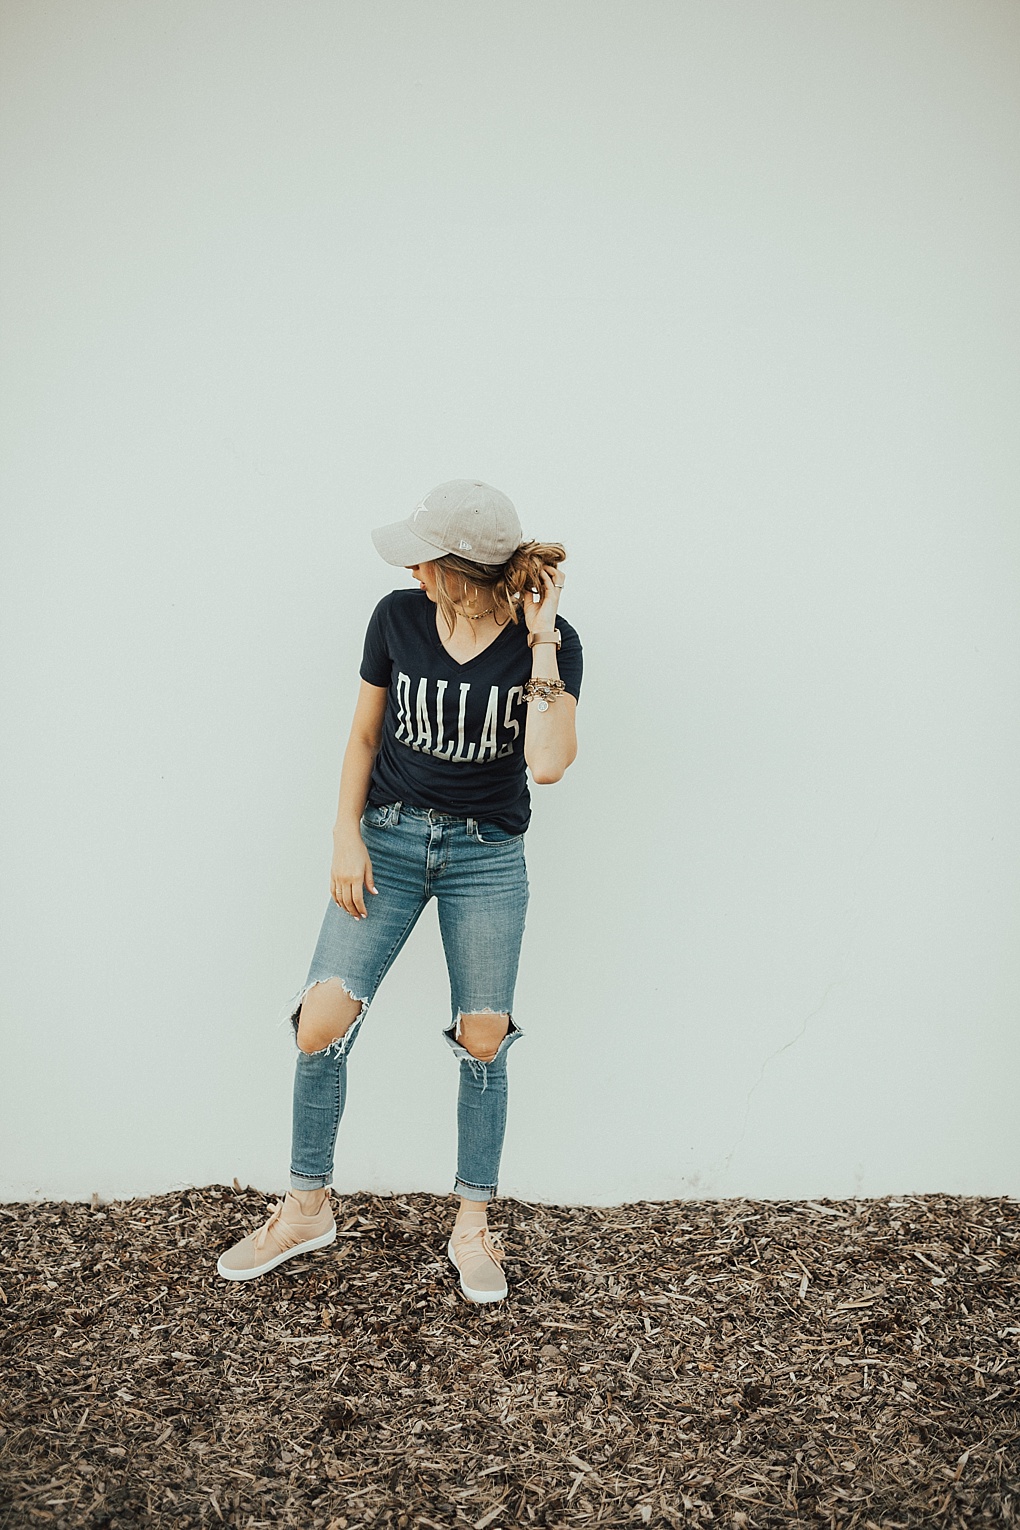 9 Ways To Wear Basic Tees For Fall by Utah fashion blogger Dani Marie